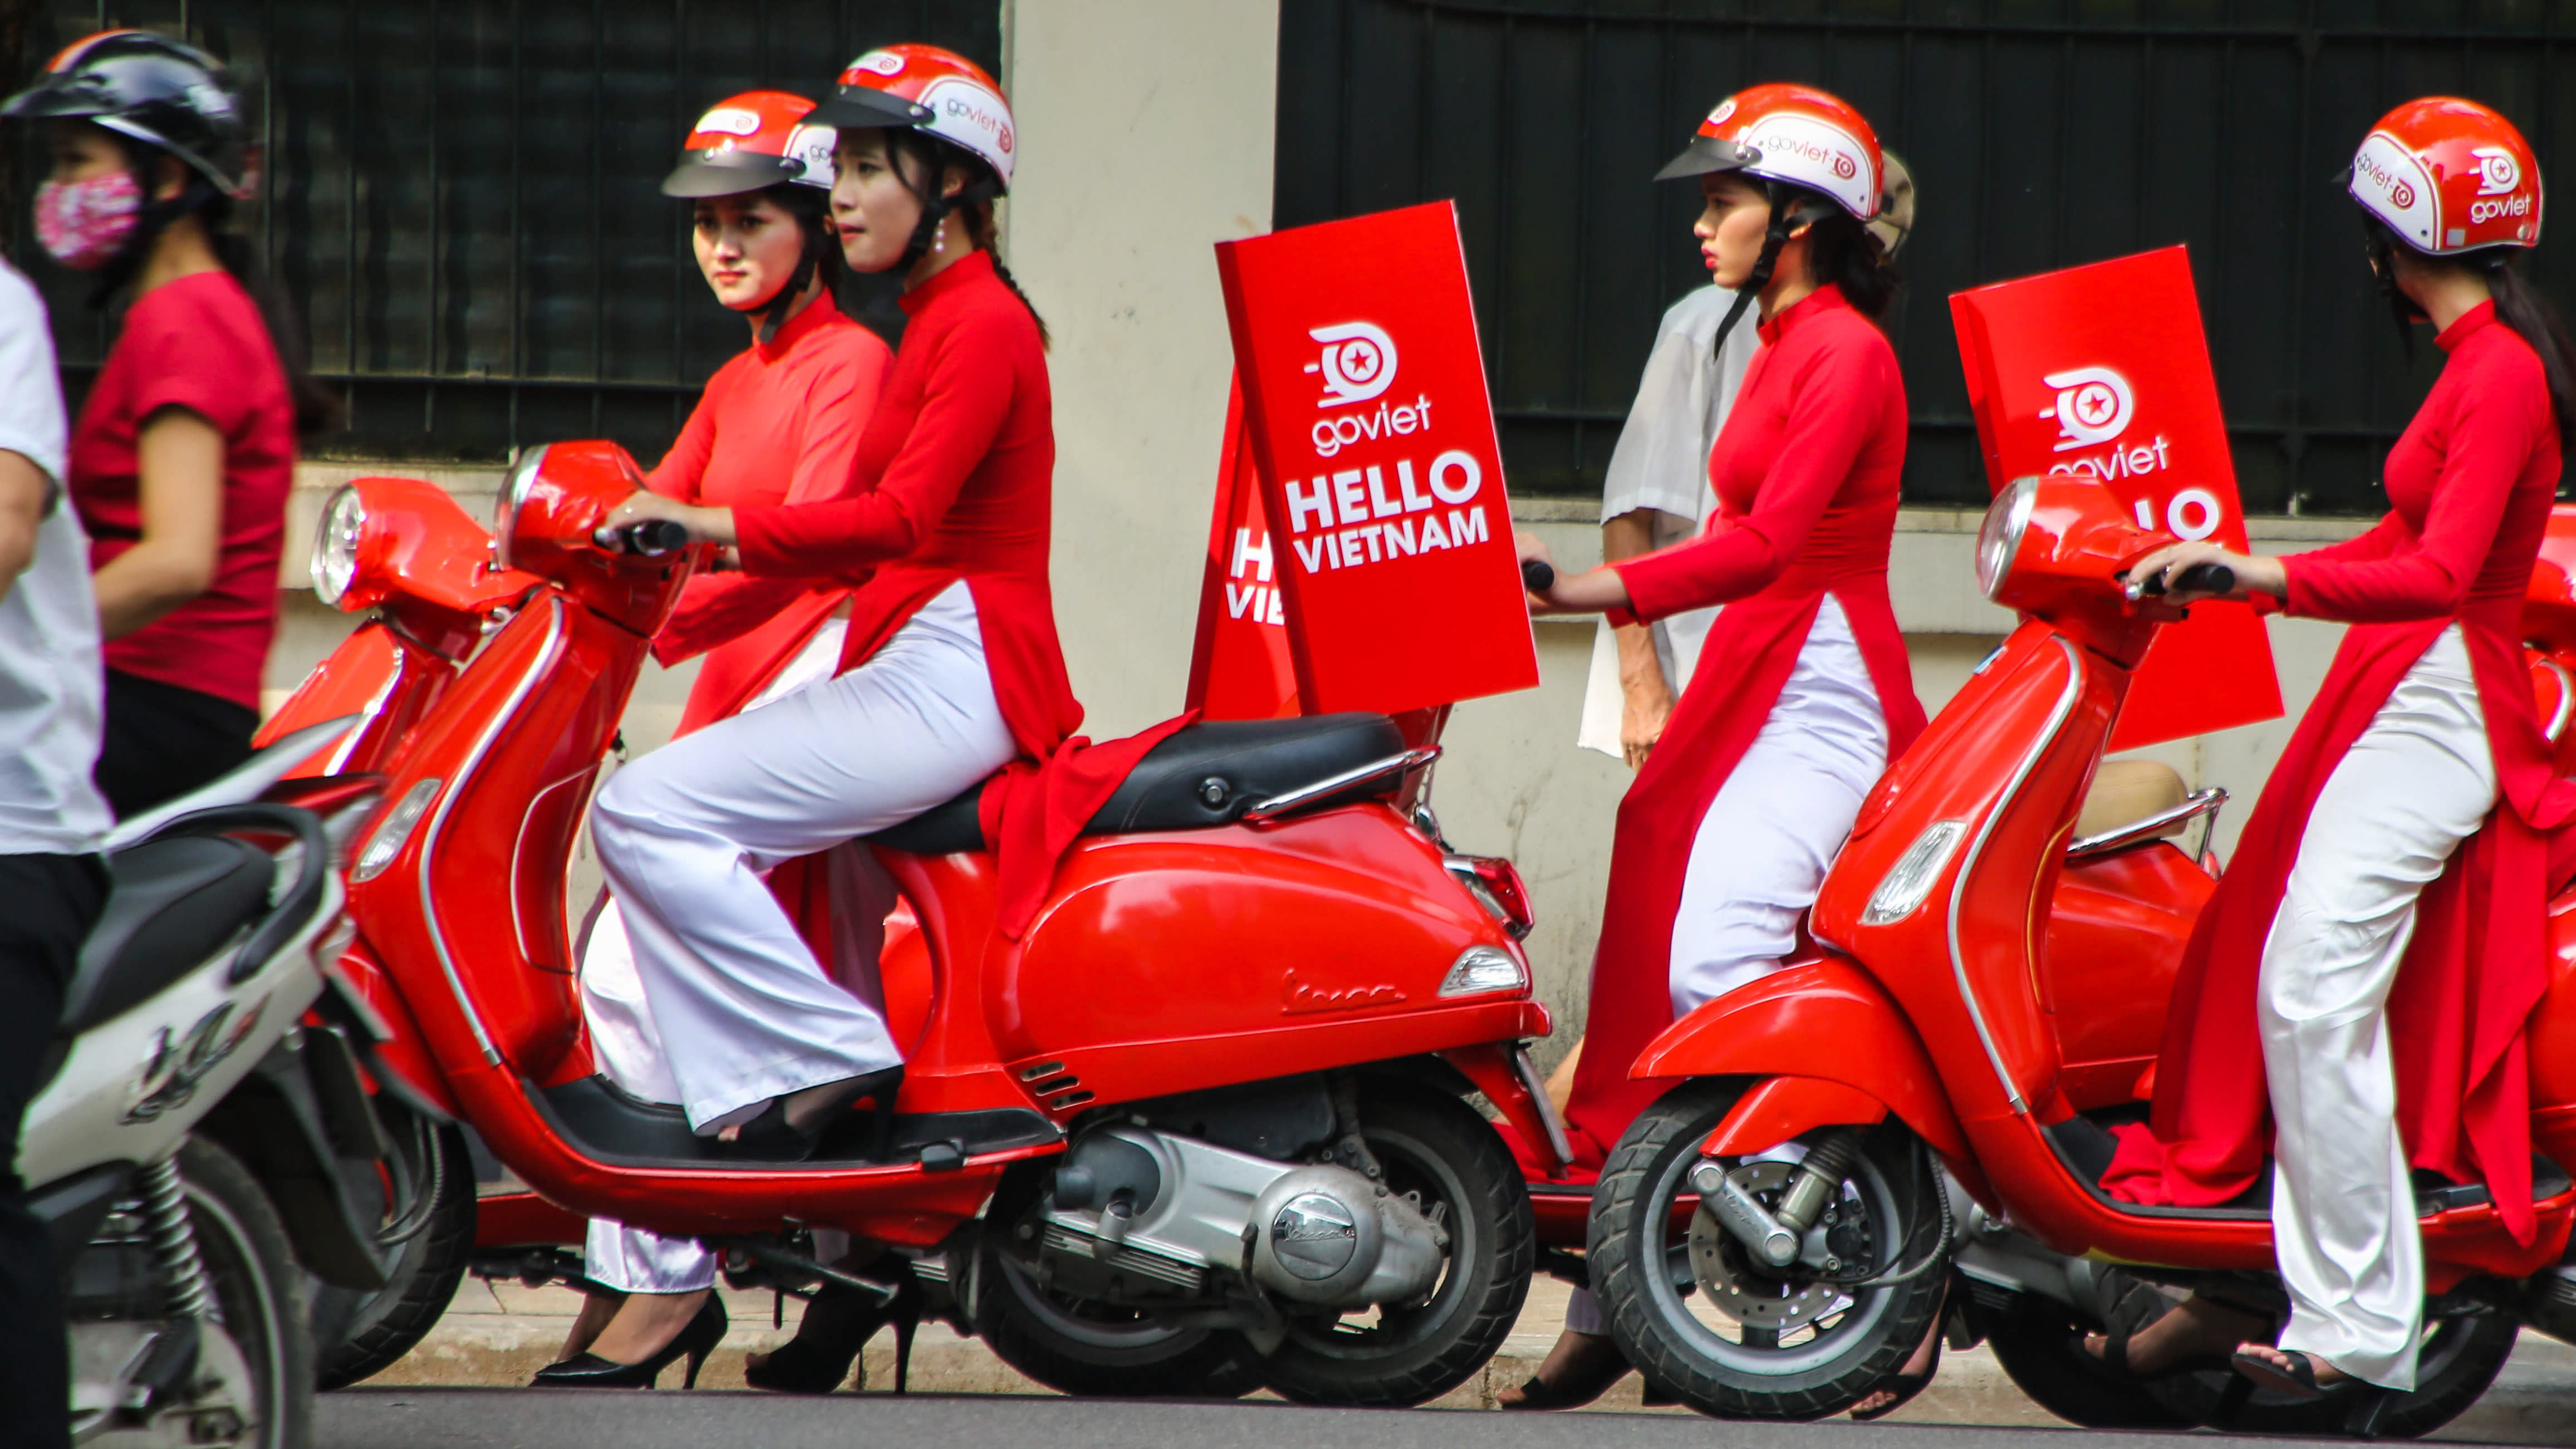 Go-Viet launched food delivery service in Hanoi